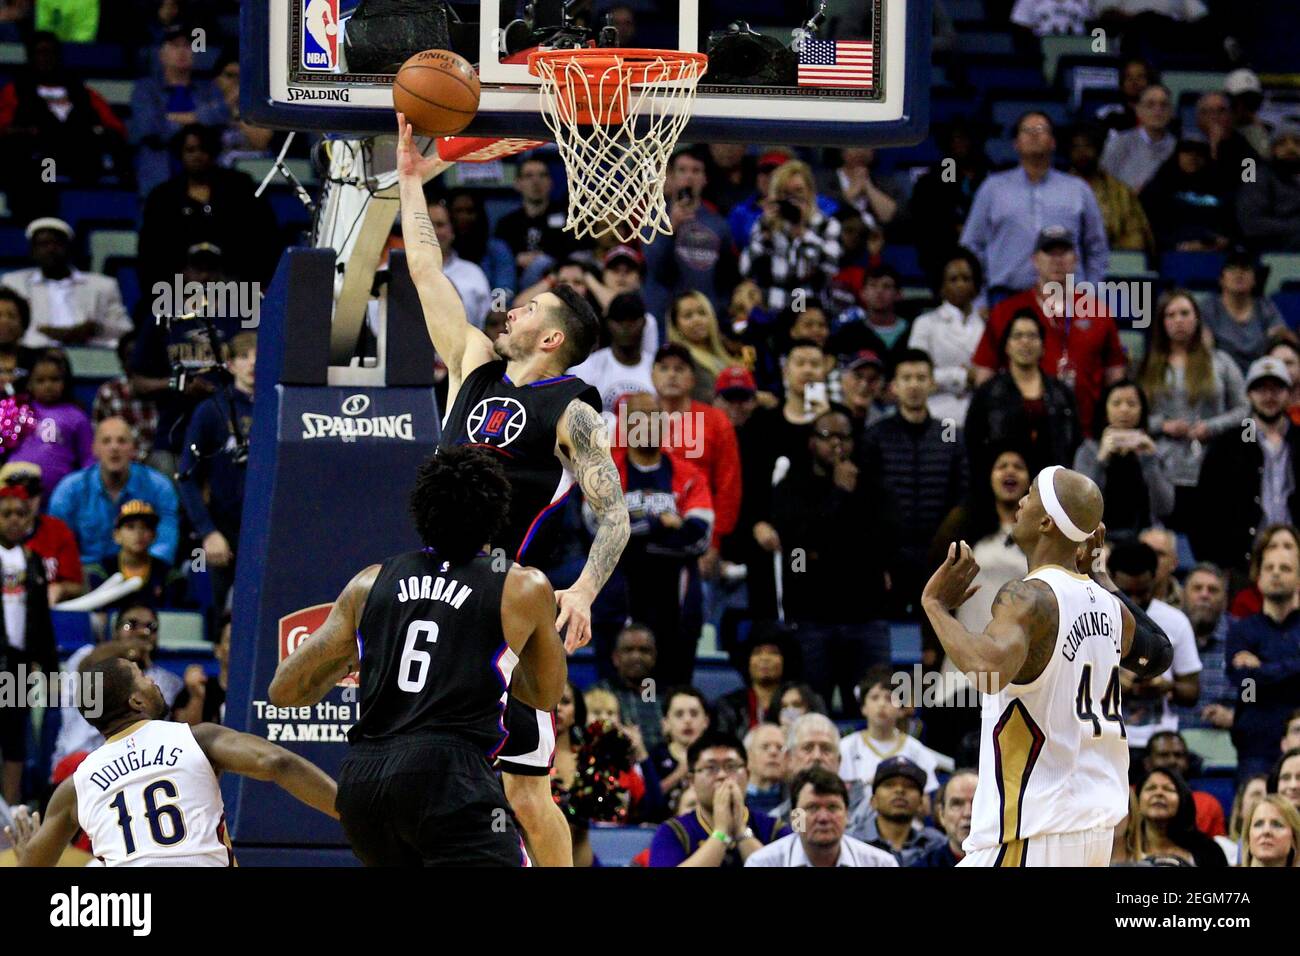 Mar 20, 2016; New Orleans, LA, USA; Los Angeles Clippers guard J.J. Redick (4) shoots against the New Orleans Pelicans during the fourth quarter of a game at the Smoothie King Center. The Pelicans defeated the Clippers 109-105. Mandatory Credit: Derick E. Hingle-USA TODAY Sports  / Reuters  Picture Supplied by Action Images   (TAGS: Sport Basketball NBA) *** Local Caption *** 2016-03-21T013031Z 706497698 NOCID RTRMADP 3 NBA-LOS-ANGELES-CLIPPERS-AT-NEW-ORLEANS-PELICANS.JPG Stock Photo